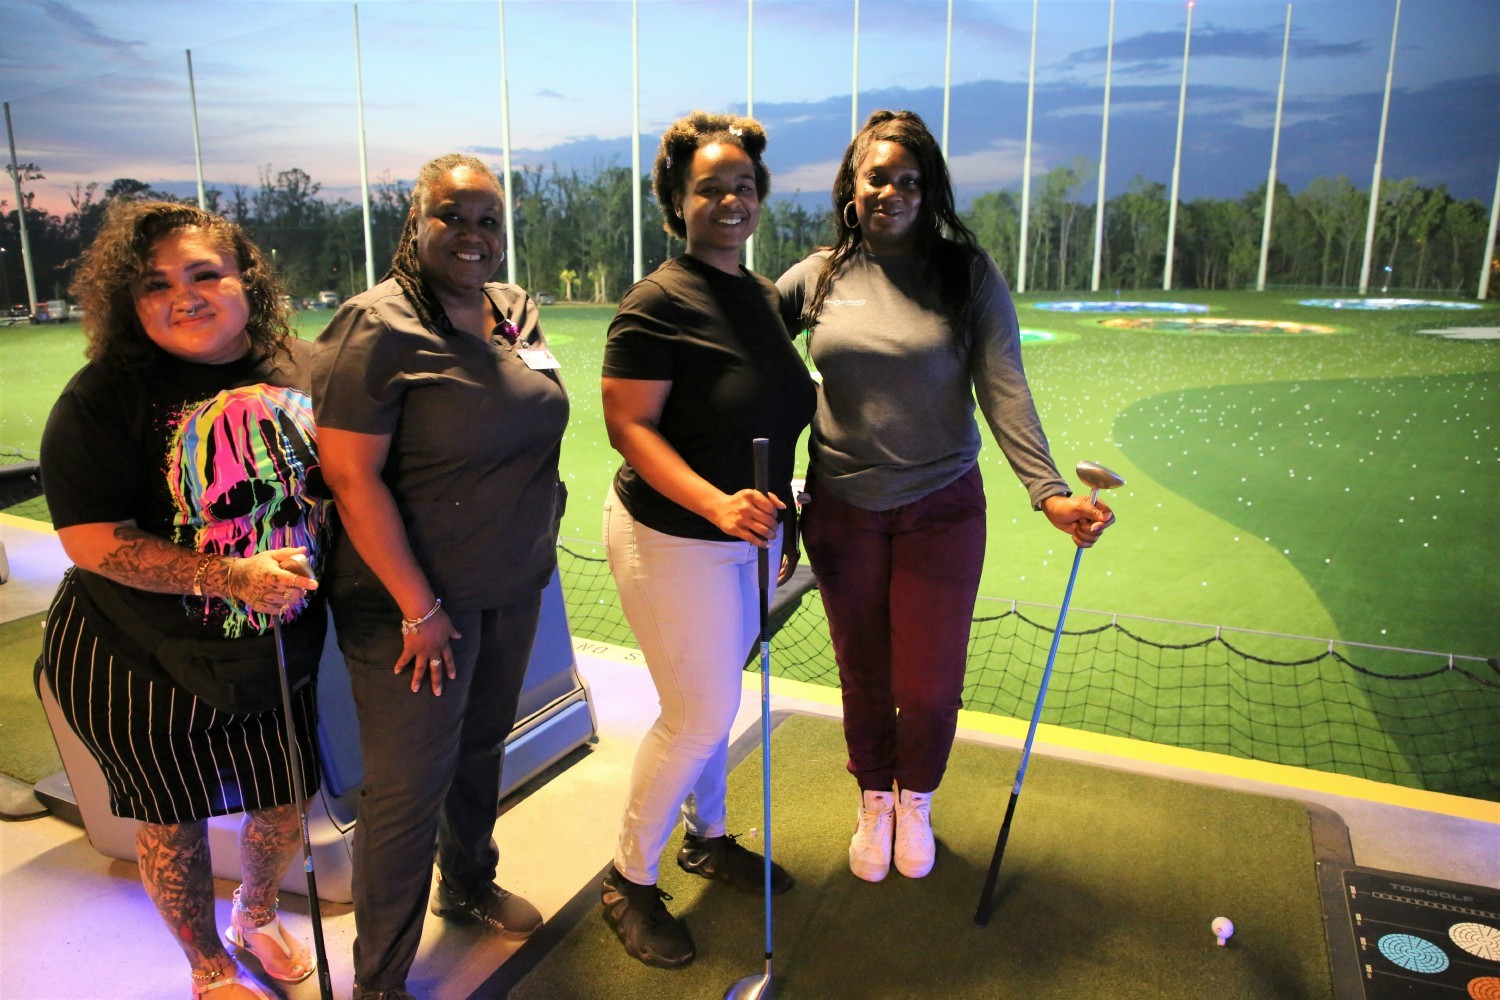 RSFH Healthcare Week celebration included an evening for all teammates at Topgolf with their colleagues